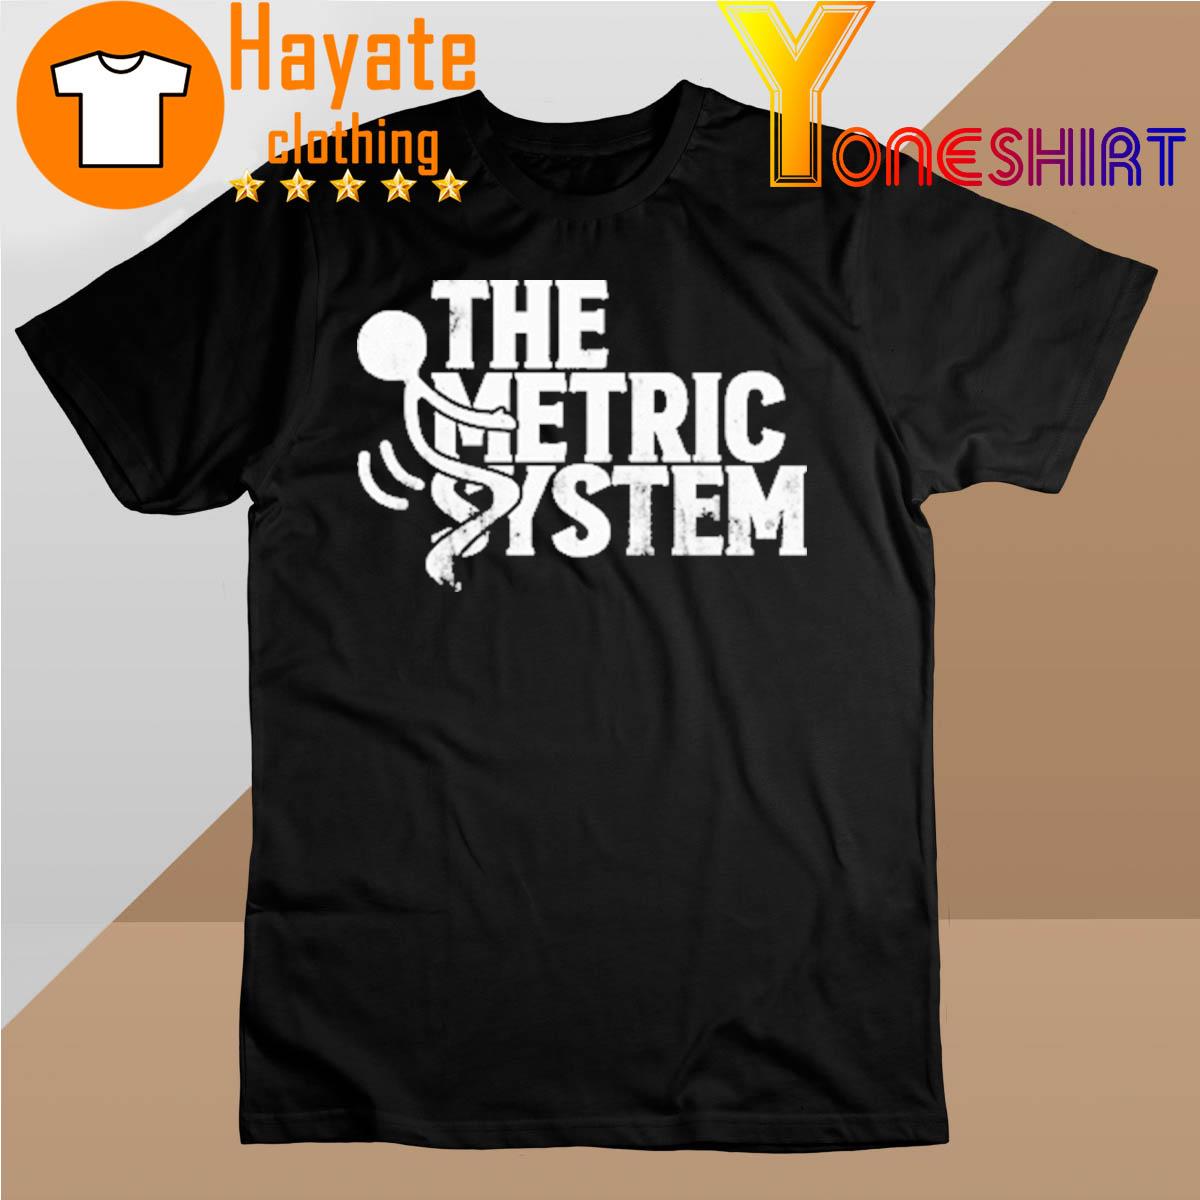 The Fat Electrician The Metric System shirt